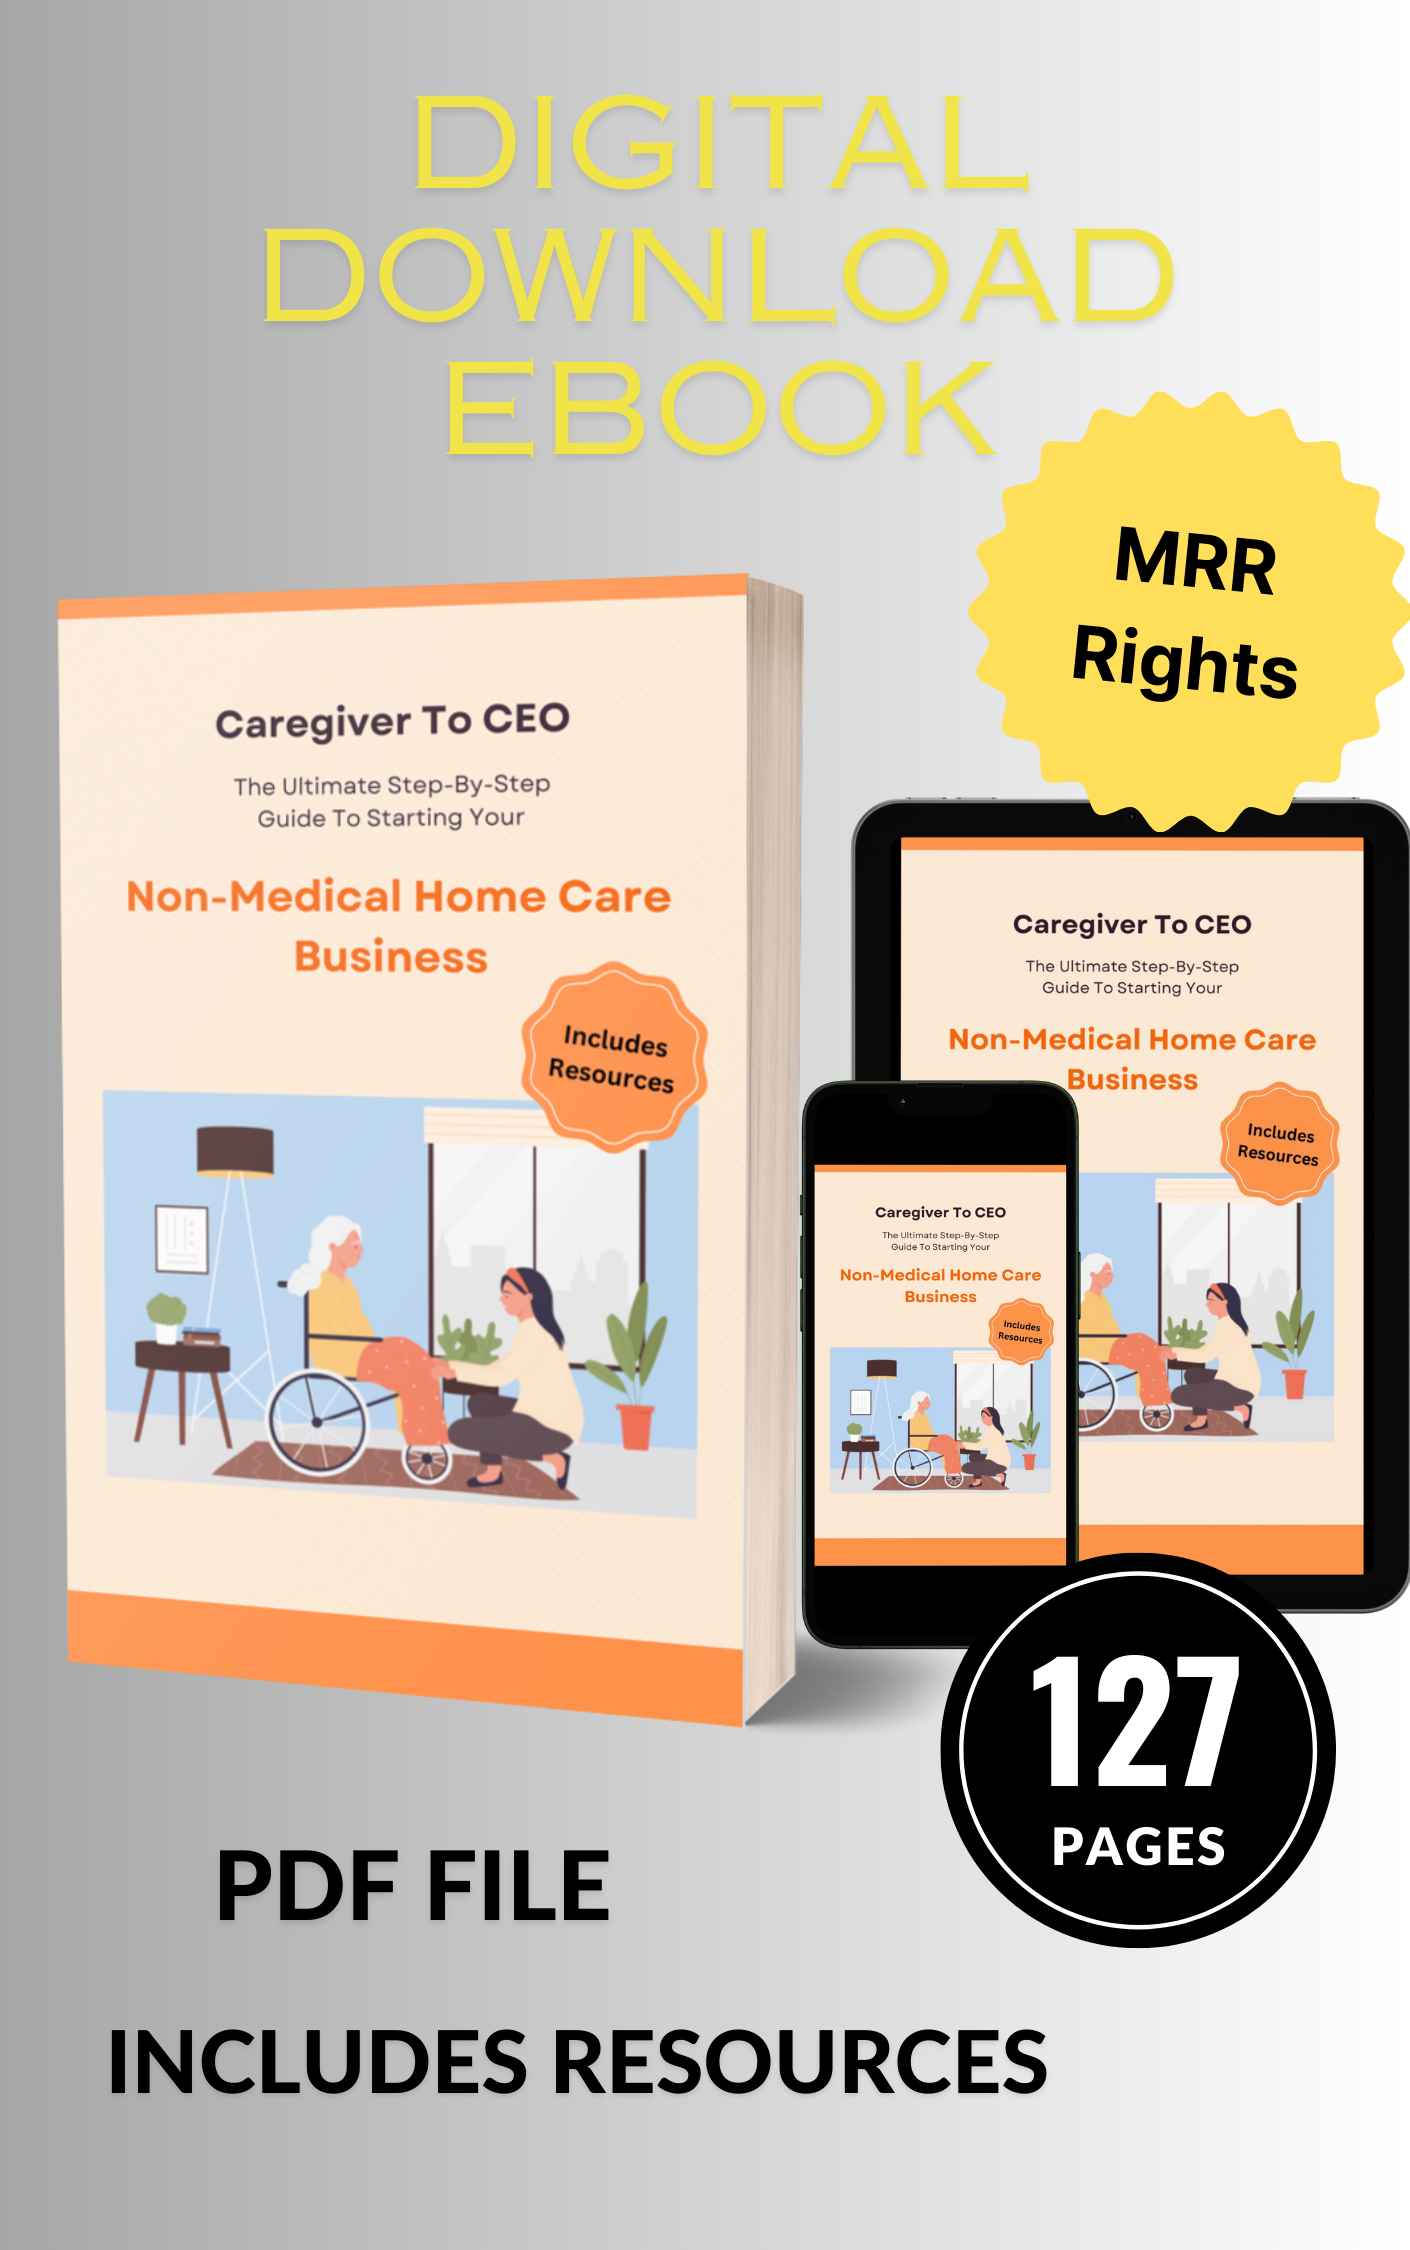 Caregiver To CEO: The Ultimate Step-By-Step Guide To Starting Your Non-Medical Home Care Business